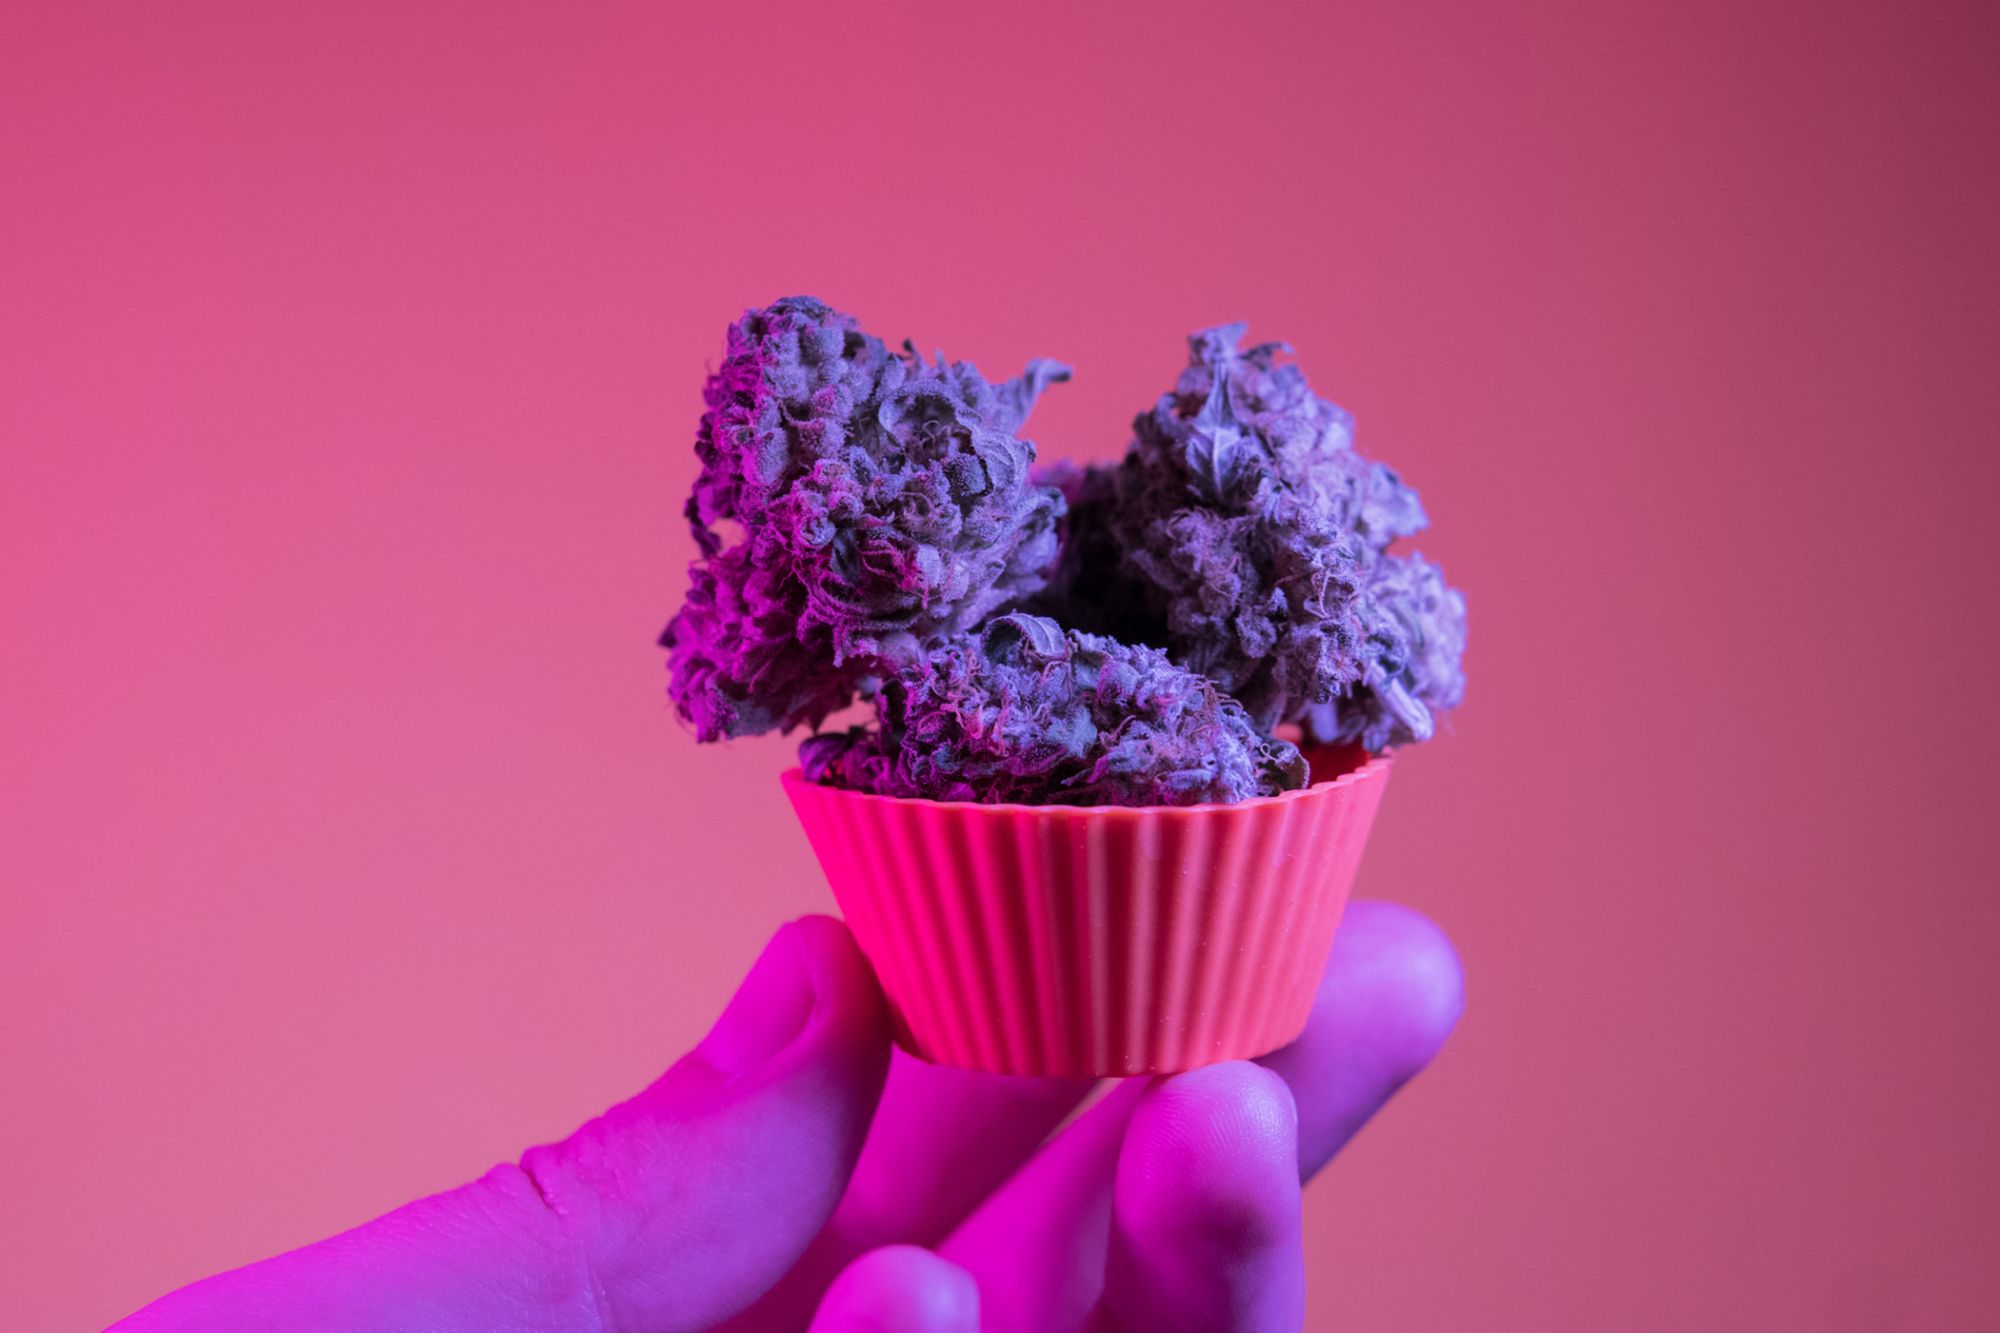 3 Ways Cannabis Brands Can Make a Powerful First Impression